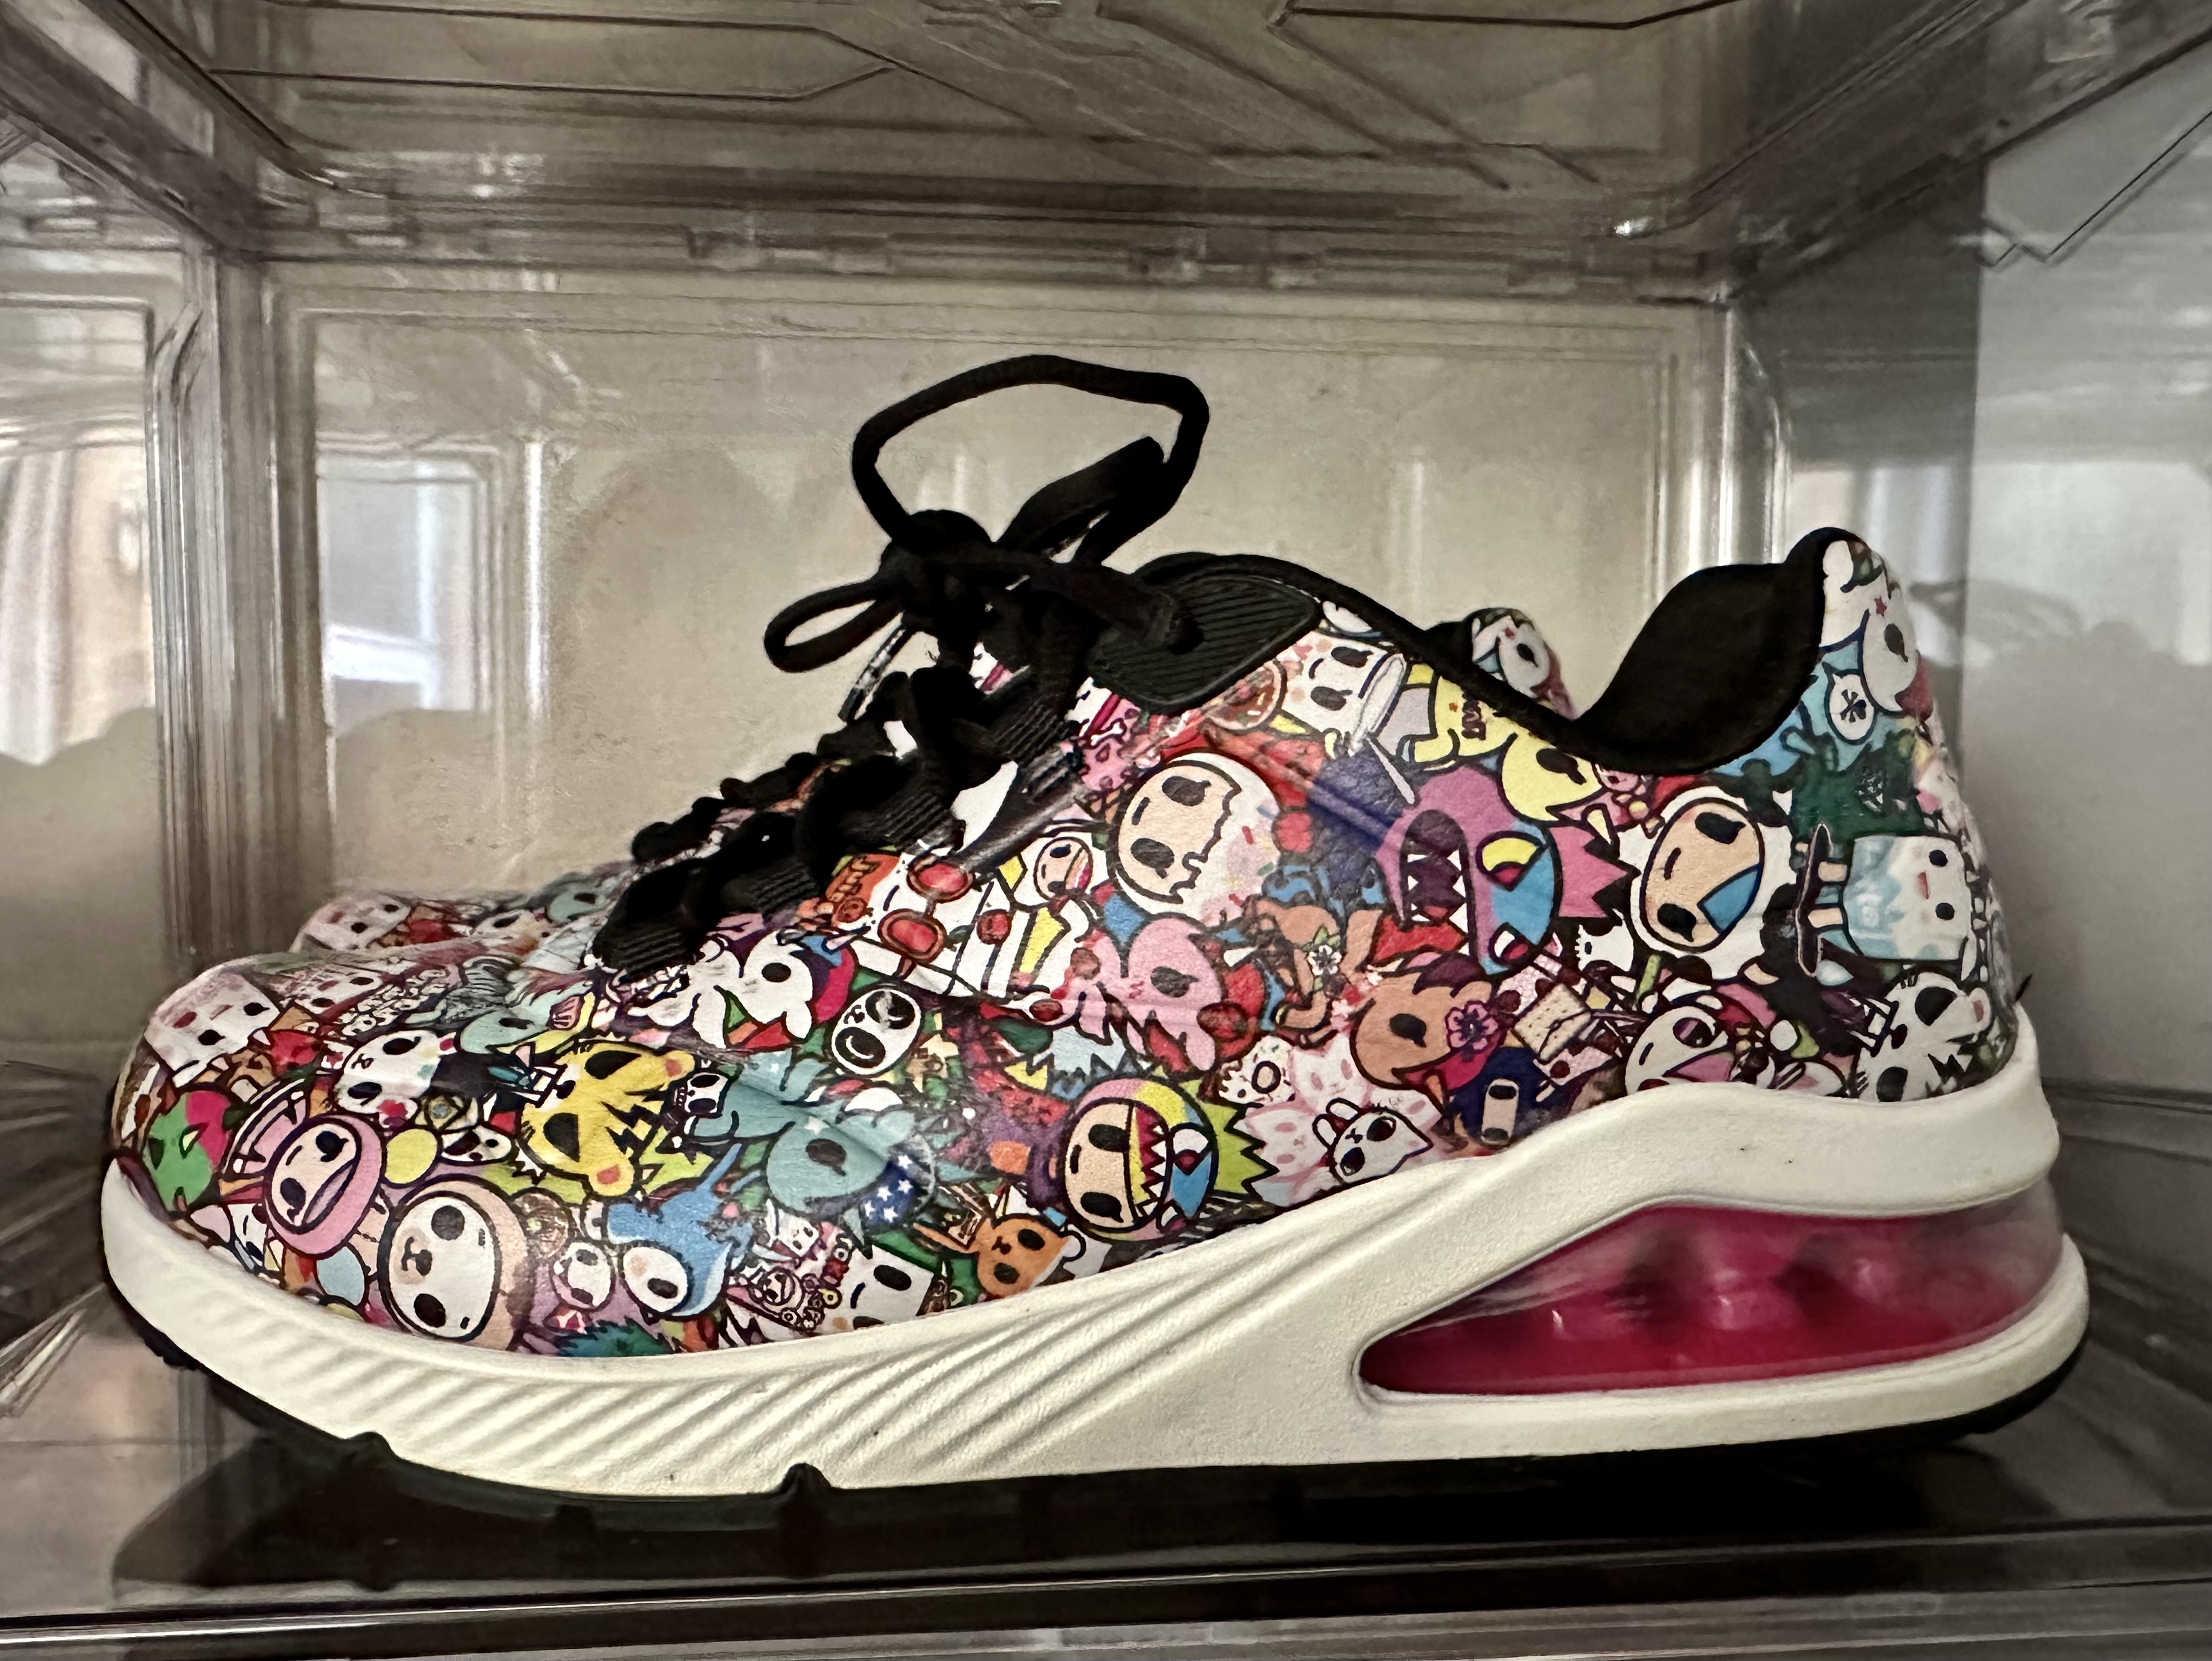 Went a long way (to NY) for my Tokidoki Skechers